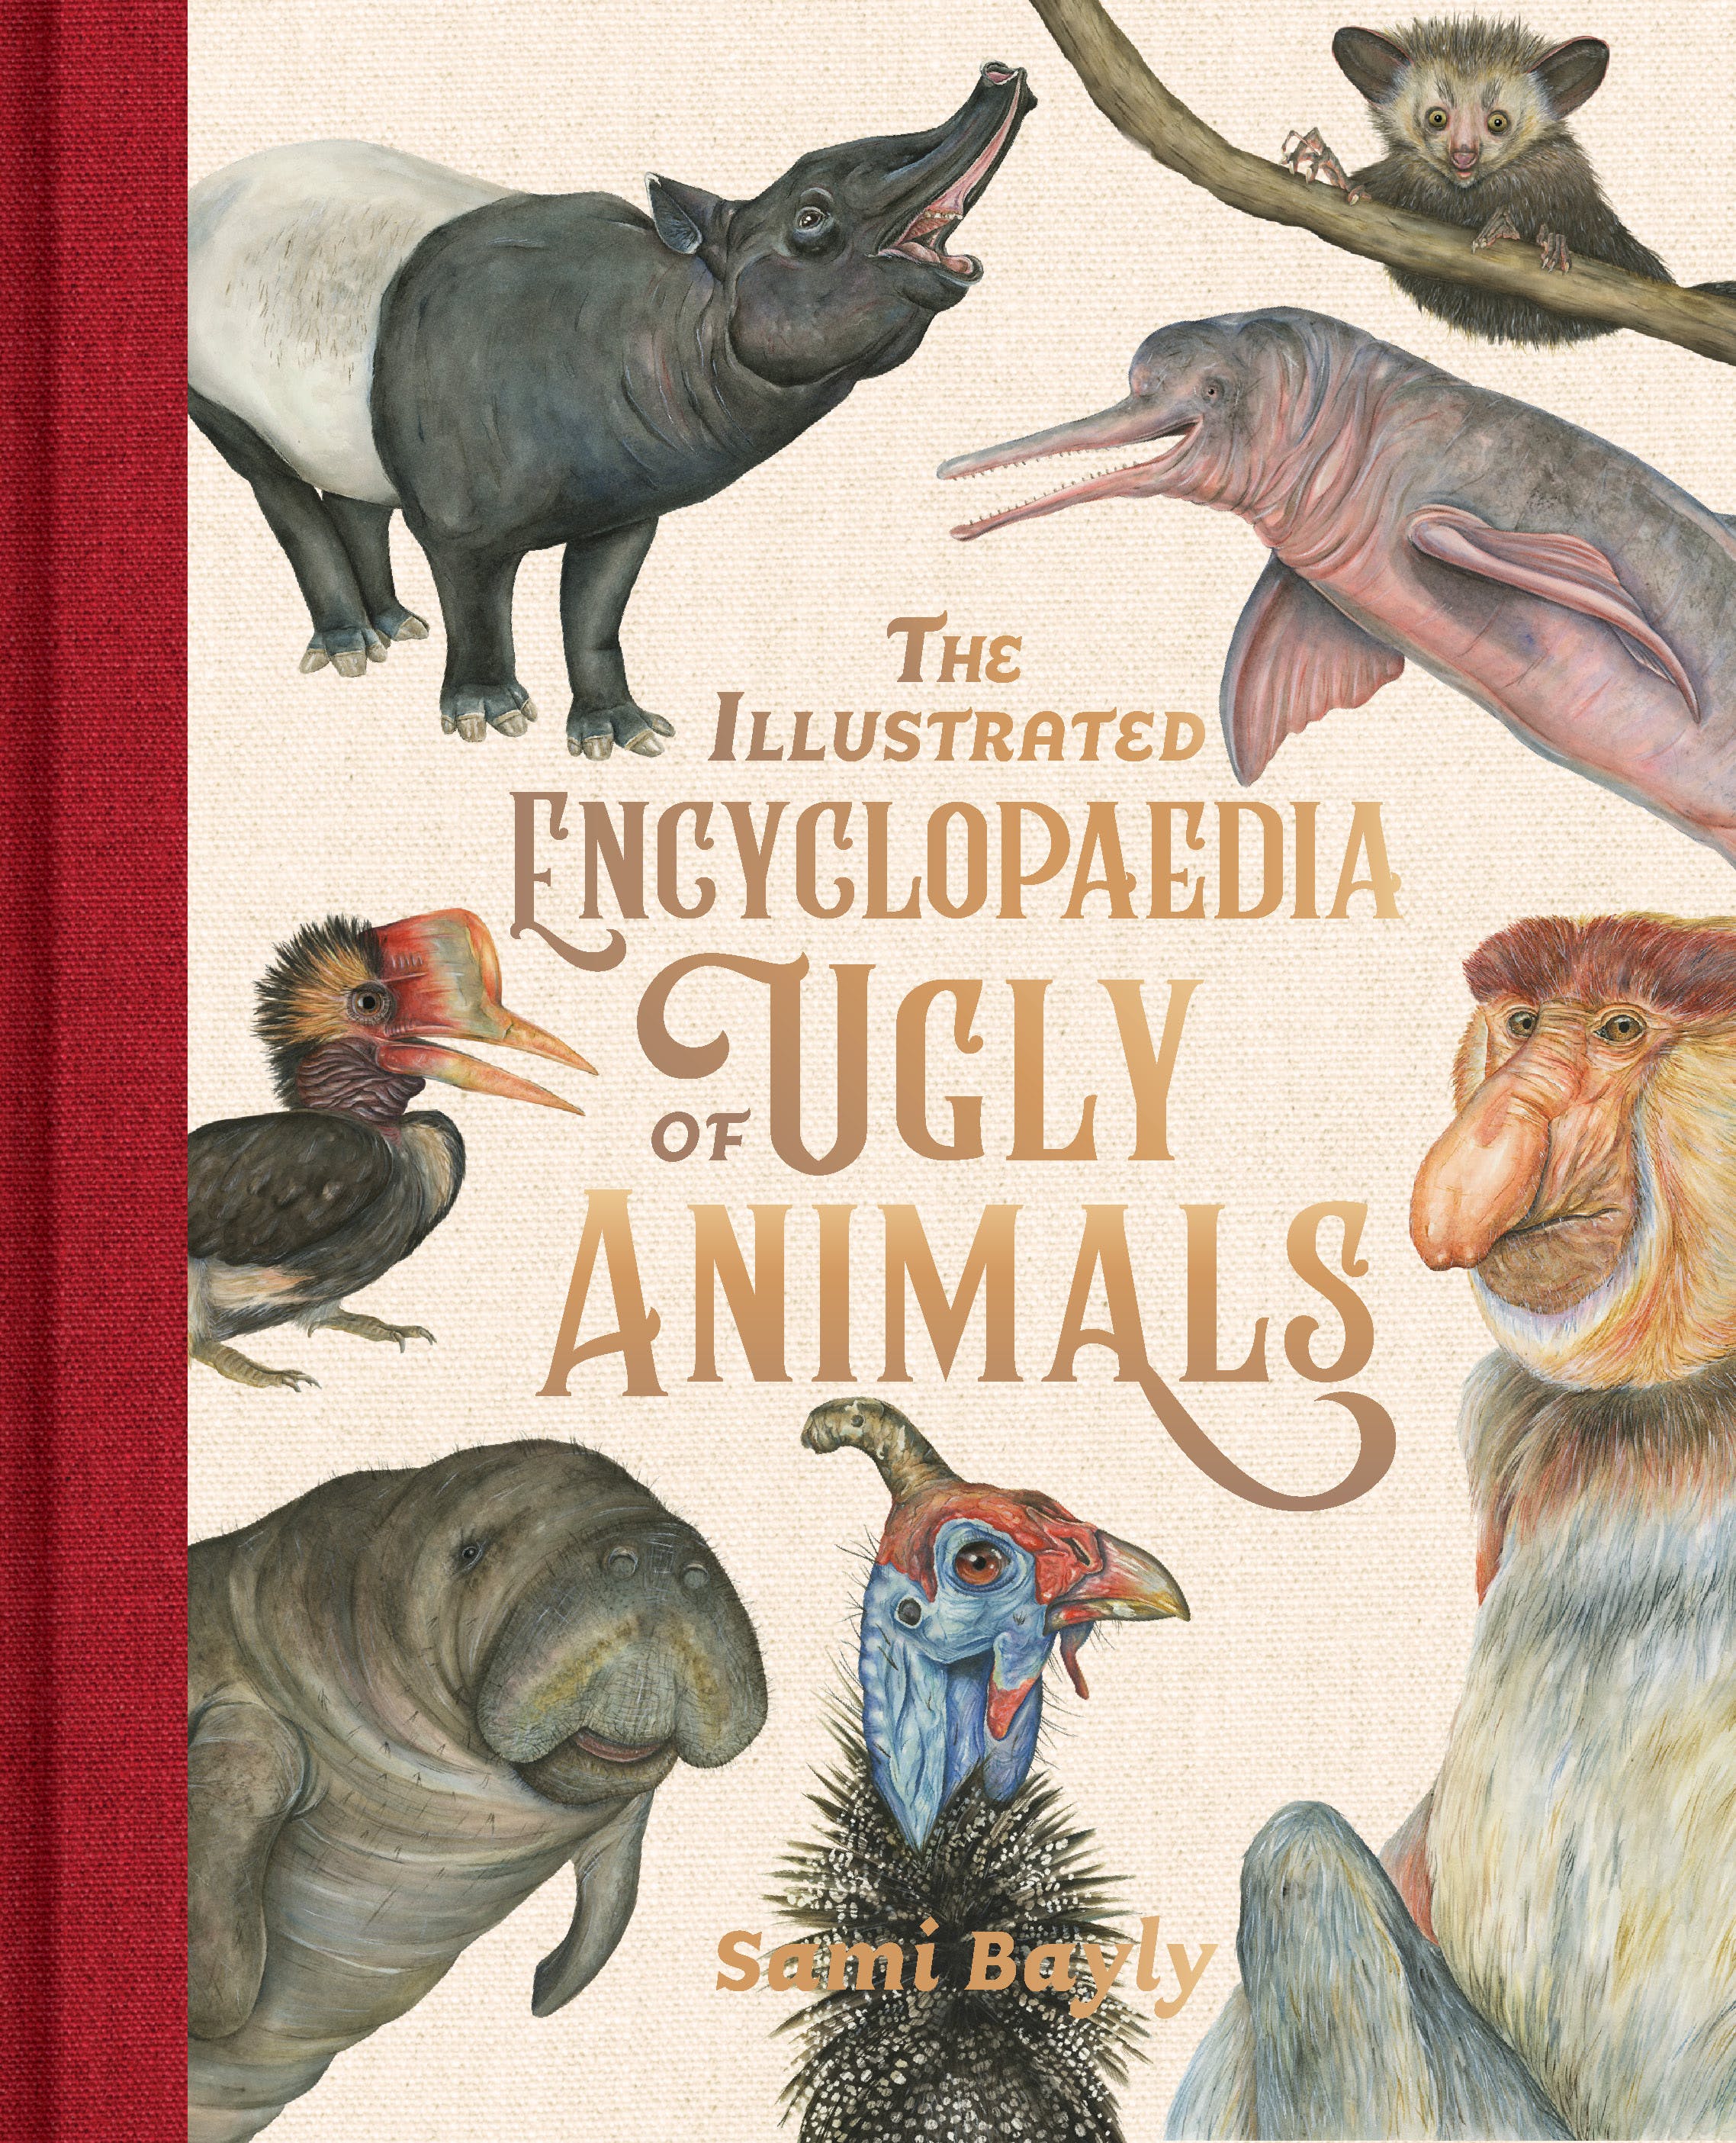 The Encyclopedia of Ugly Animals